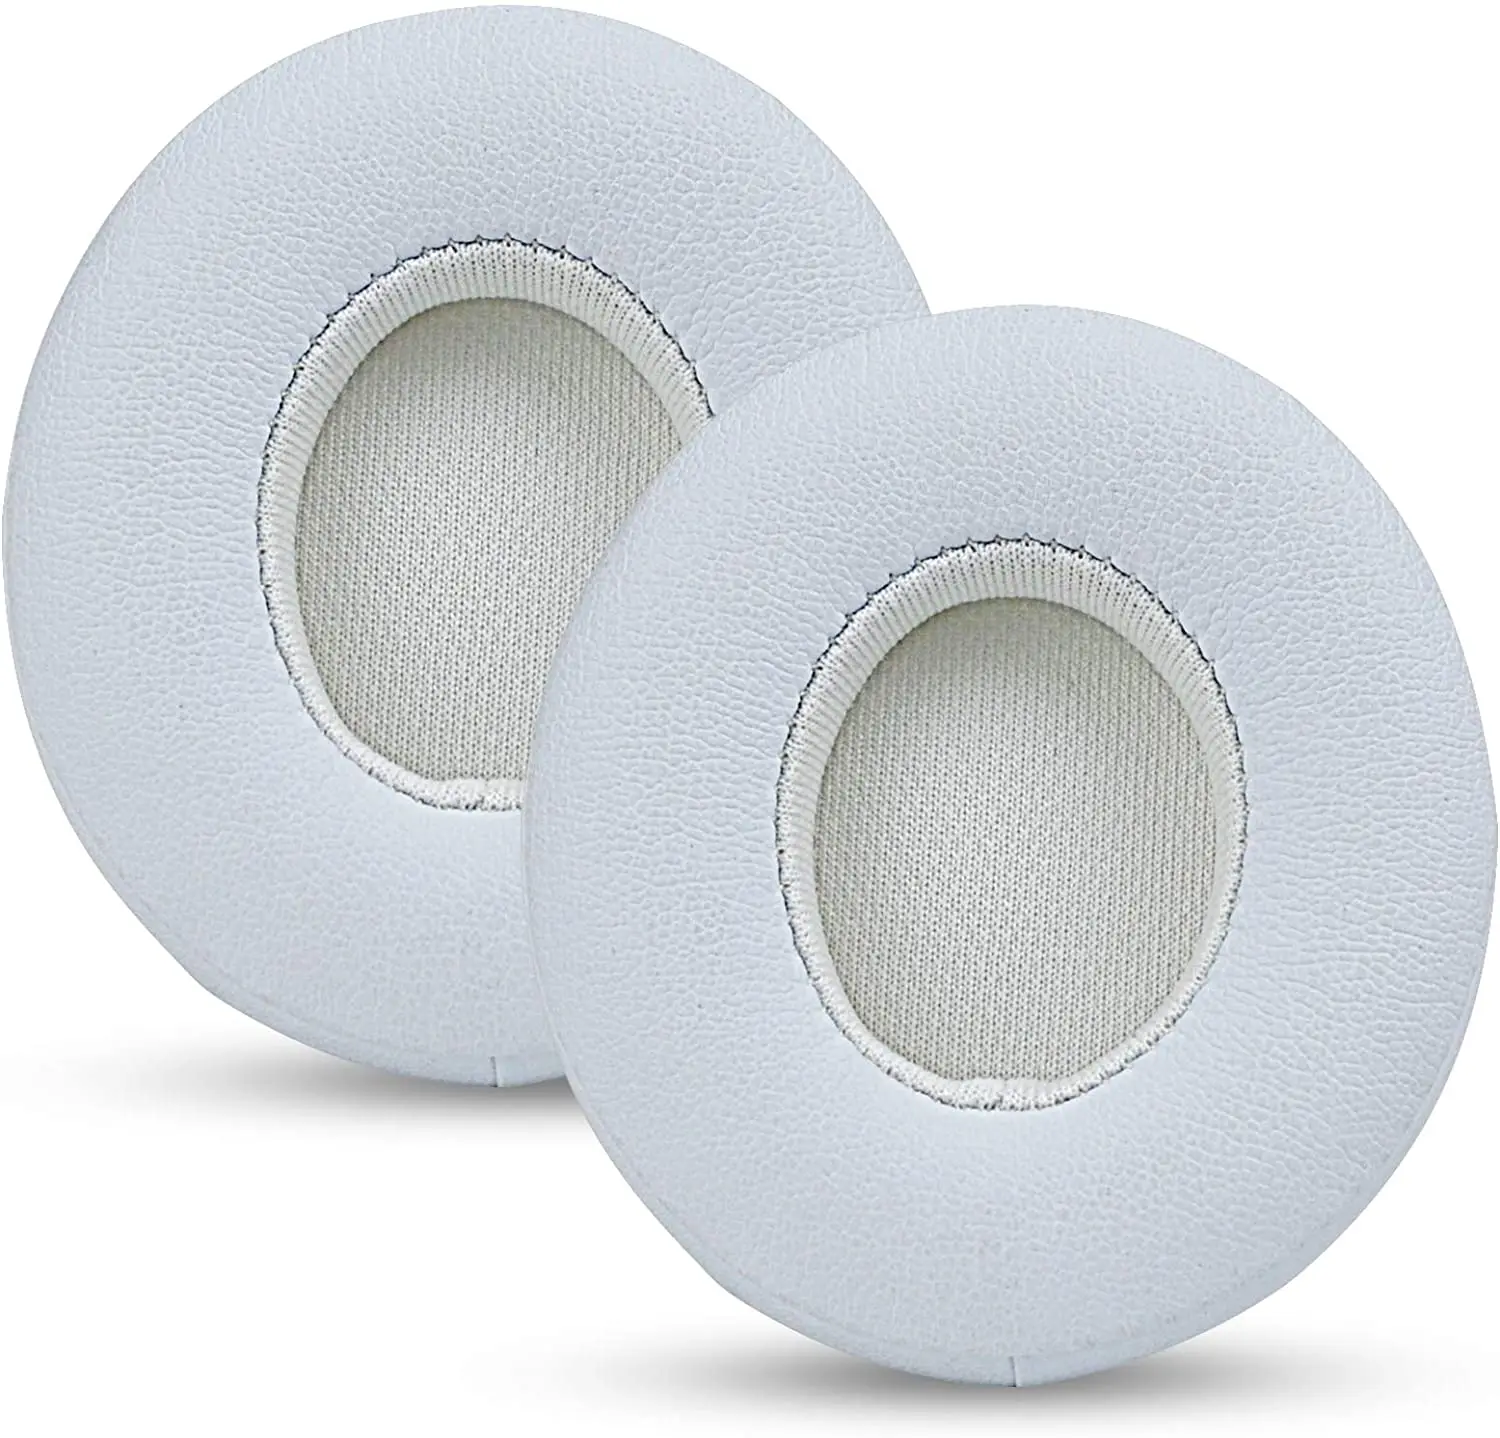 Solo3 Solo2 Earpads Replacement,Memory Foam Ear Cushion Cover Compatible with Beats Solo 2/3 Wireless On Ear Headphones ONLY